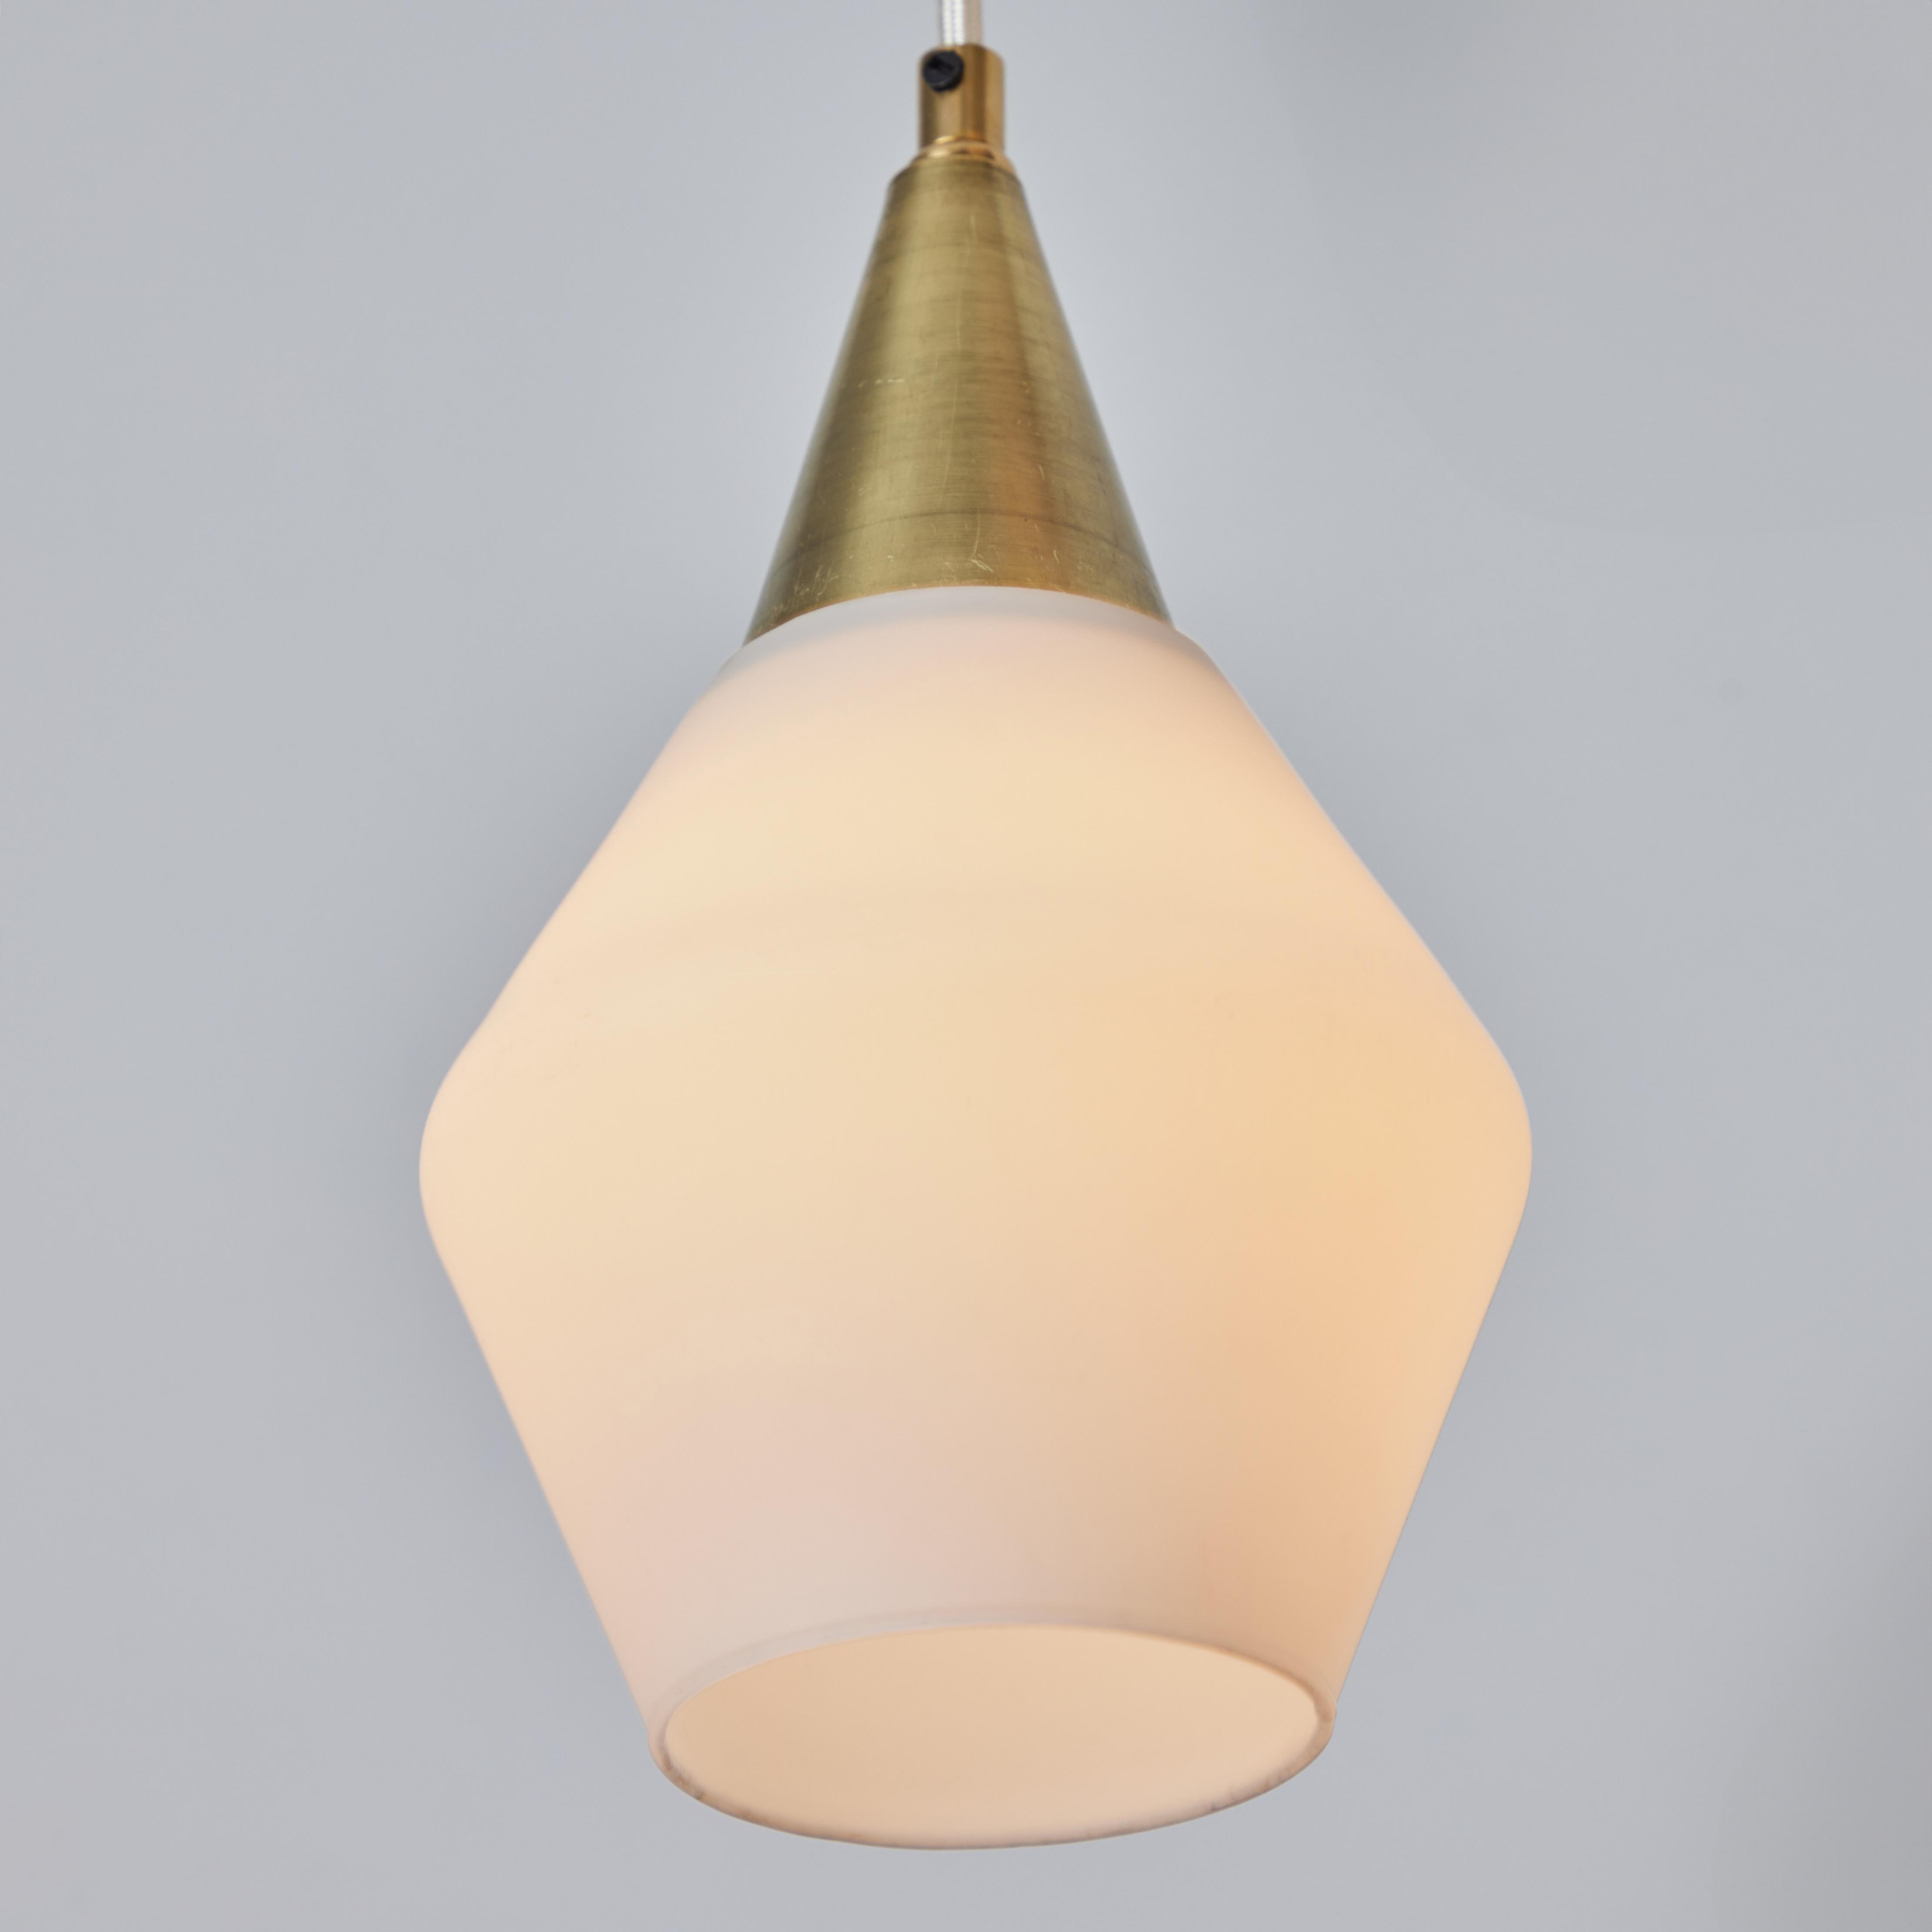 1960s Opaline Glass and Brass Pendant Attributed to Mauri Almari for Idman. Executed in opaline glass and brass with white cloth cord. Highly reminiscent of Paavo Tynell's iconic designs for Taito Oy. An incredibly refined design that is